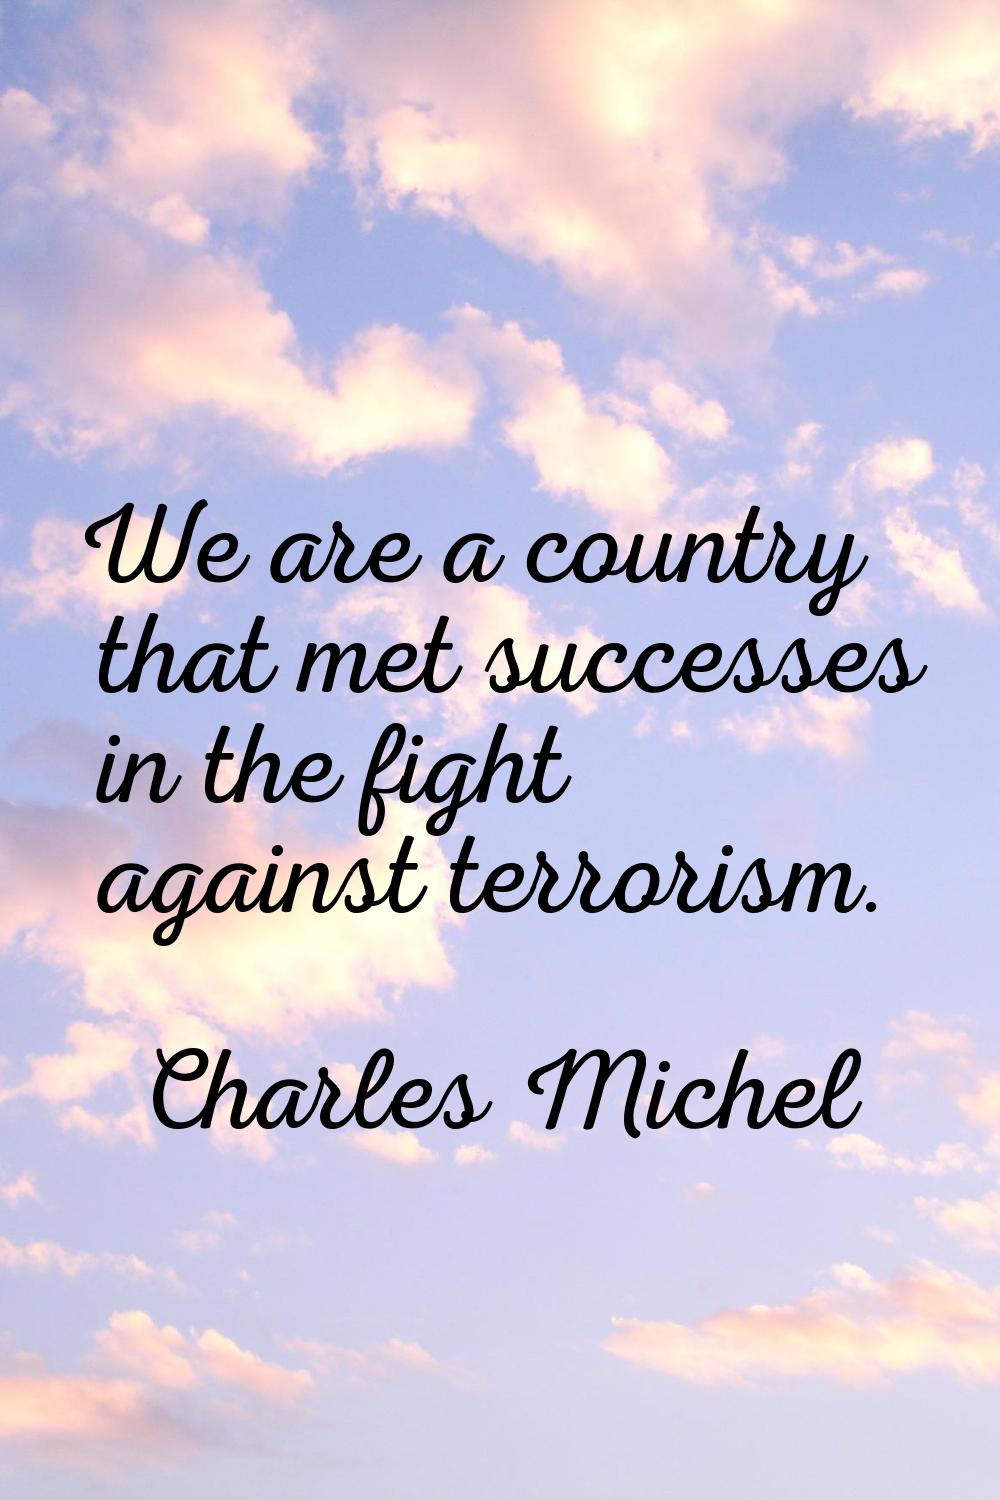 We are a country that met successes in the fight against terrorism.